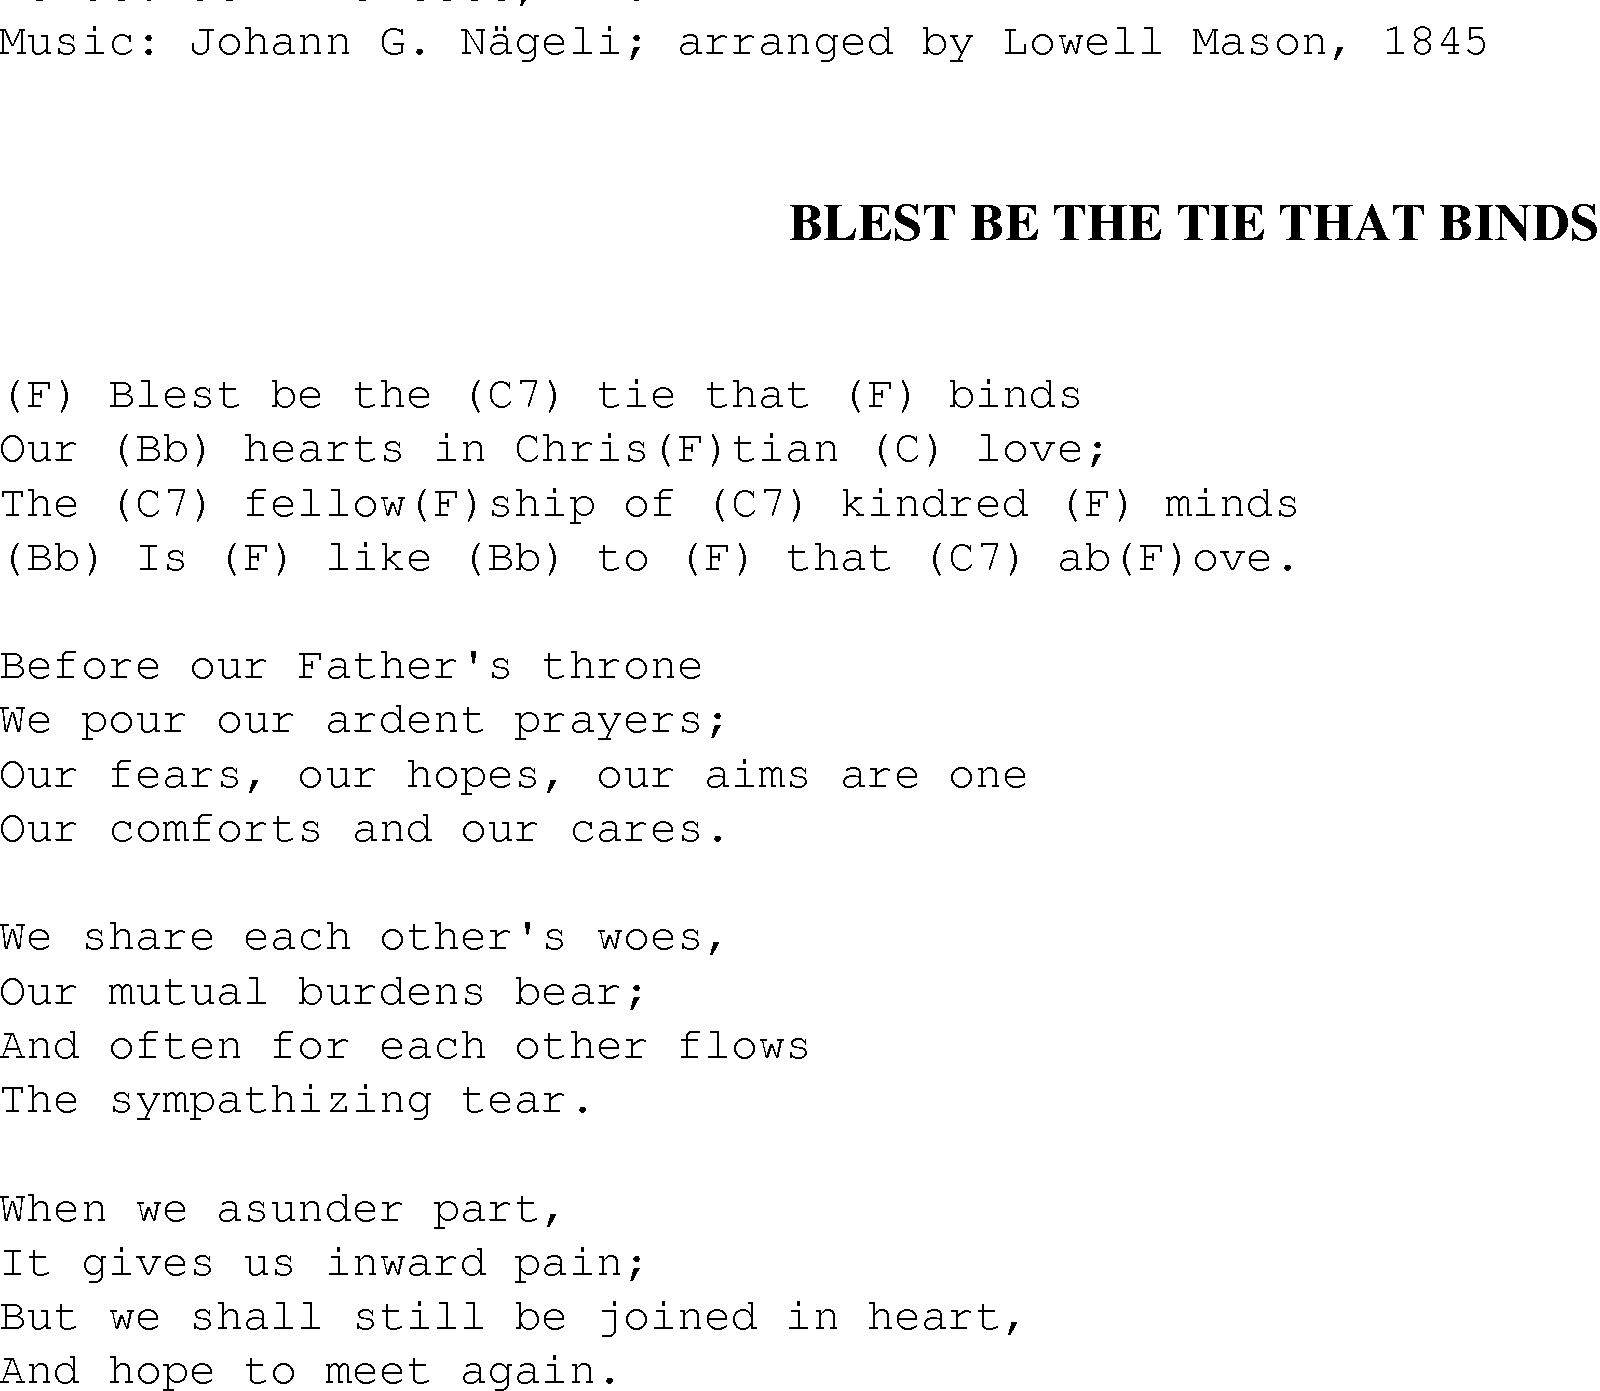 Gospel Song: blest_be_the_ties_that_bind, lyrics and chords.